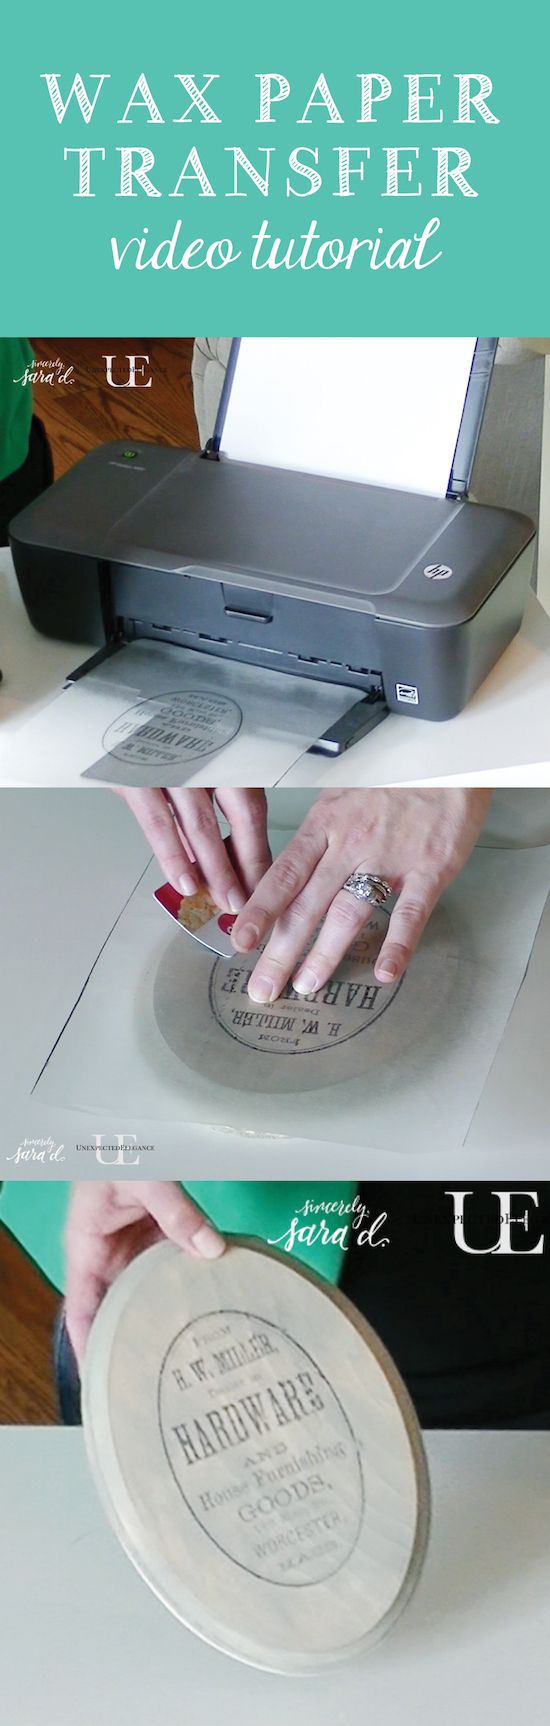 Wax Paper Image Transfer. 